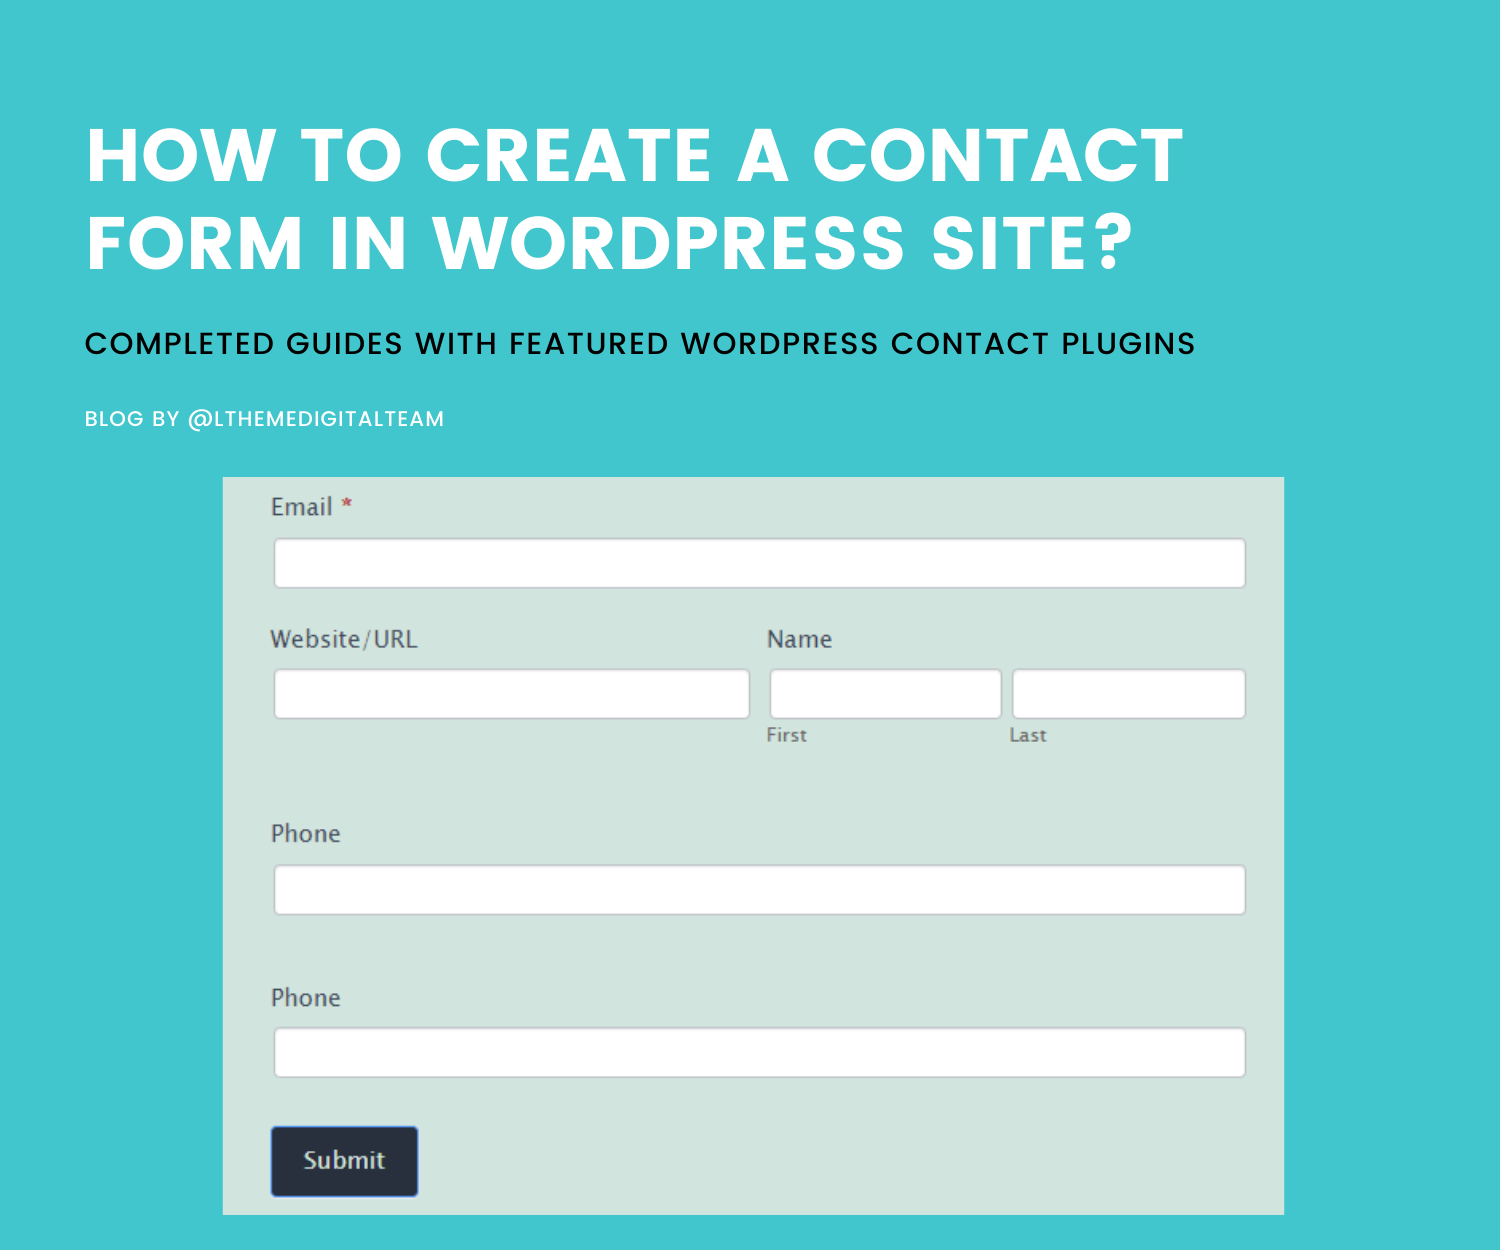 HOW TO CREATE A CONTACT FORM IN WORDPRESS SITE (2)